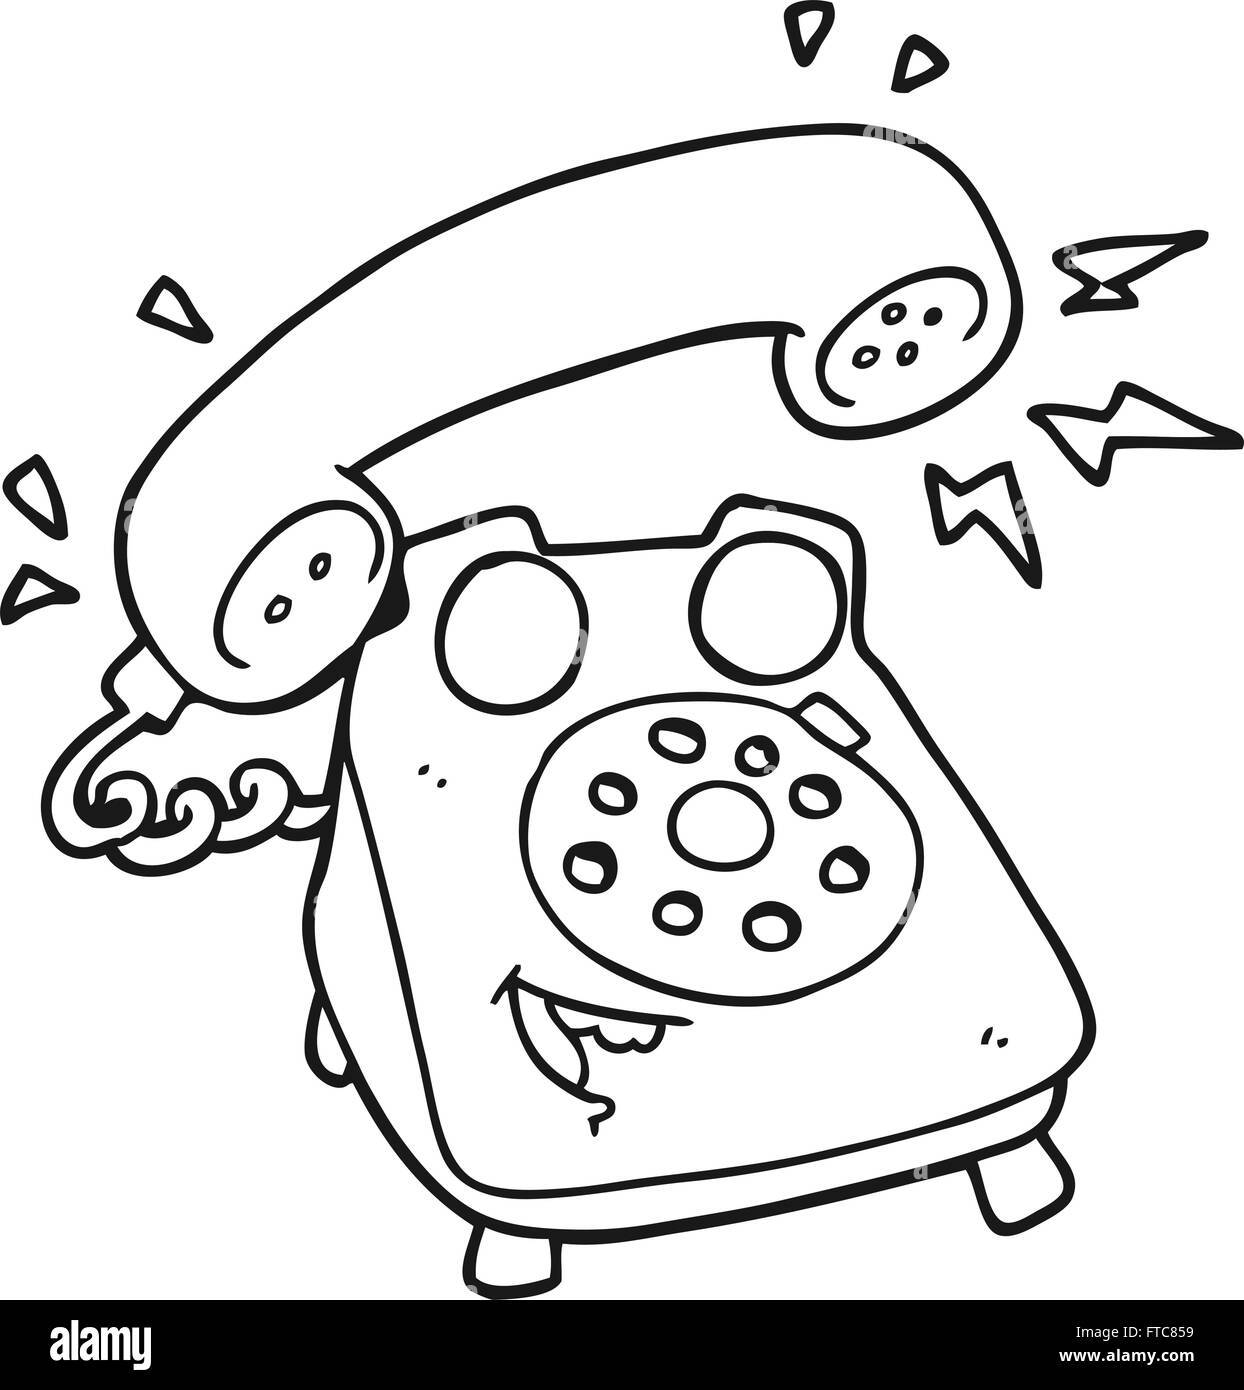 telephone ringing clipart black and white